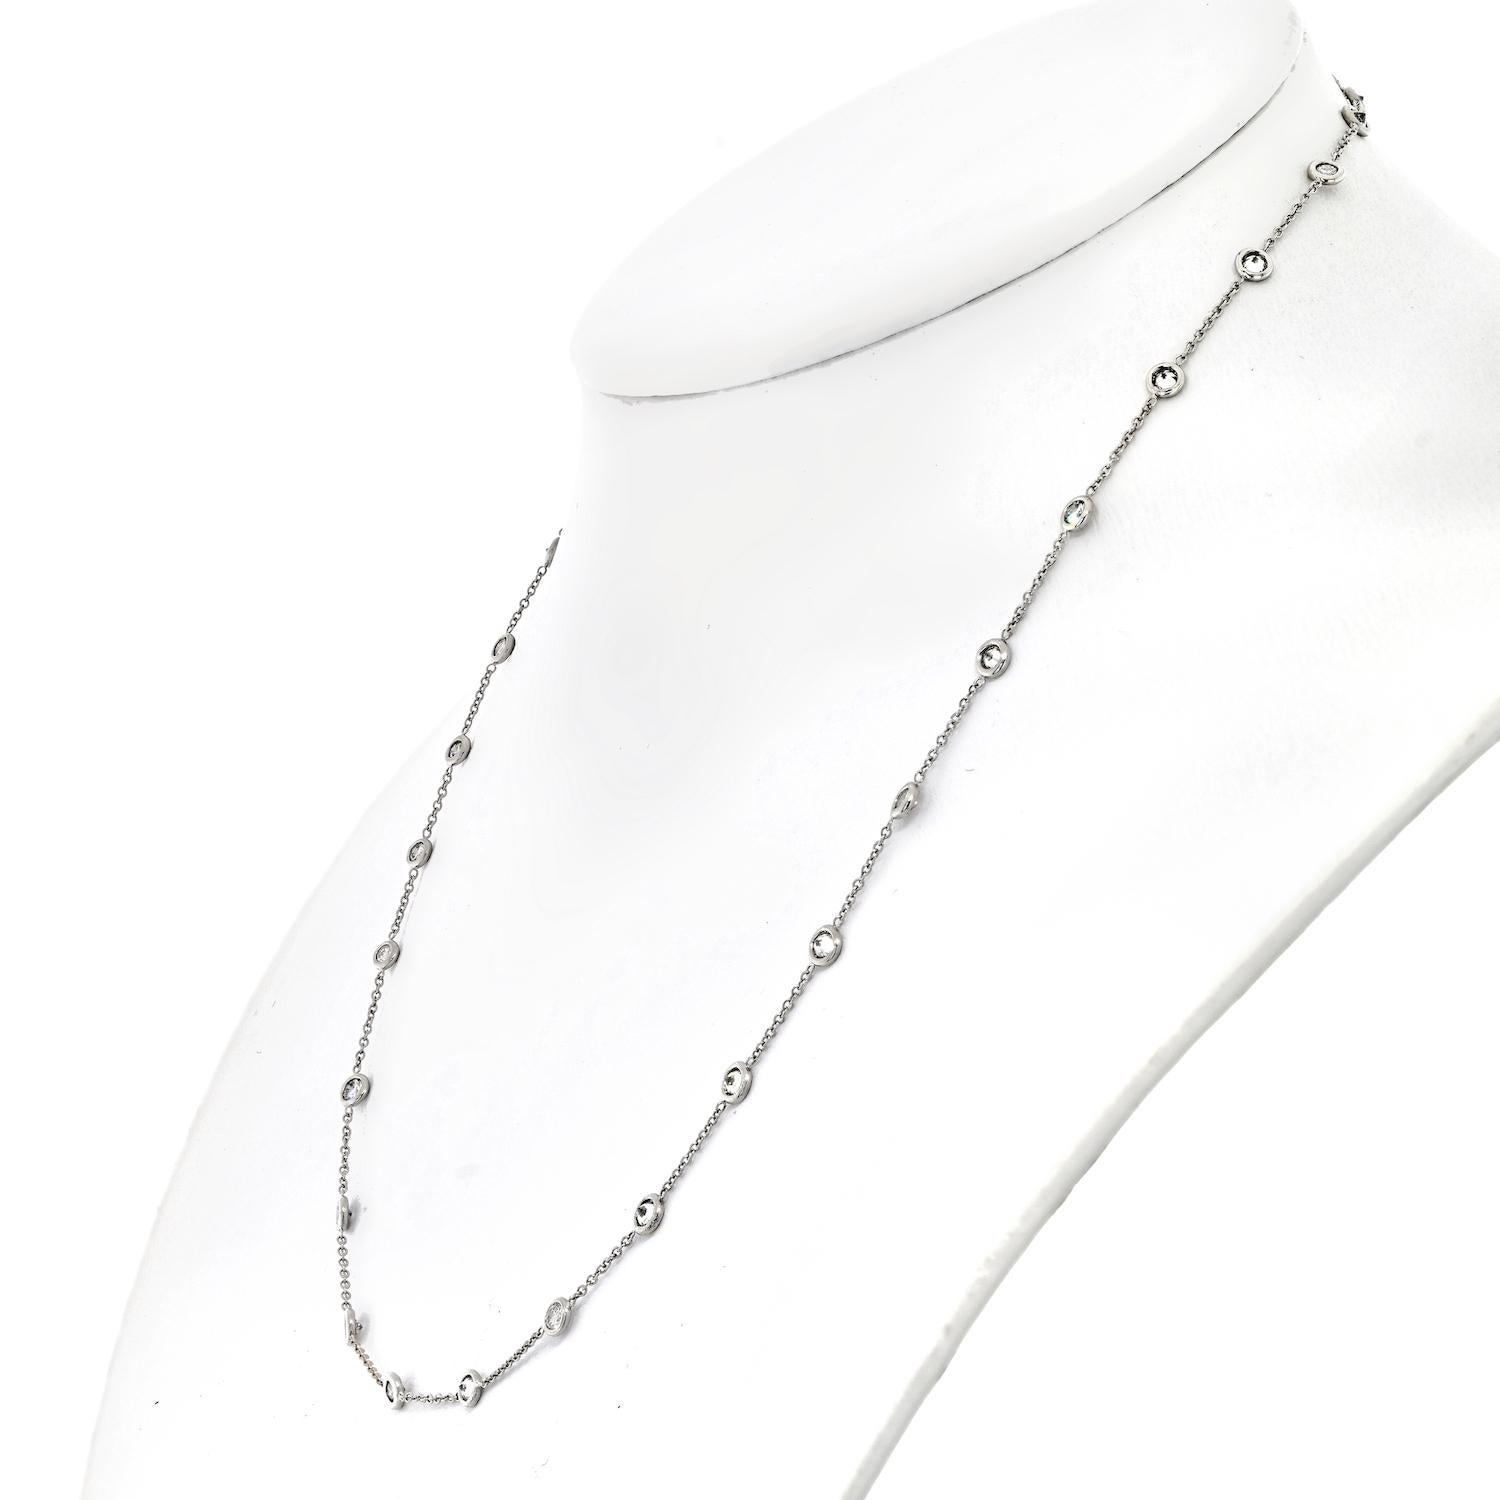 The delicate Diamond by the Yard necklace is a stunning piece of jewelry that is sure to turn heads. With a total carat weight of 2.50cttw, the necklace boasts 31 round diamonds that are beautifully set to catch the light from every angle. The